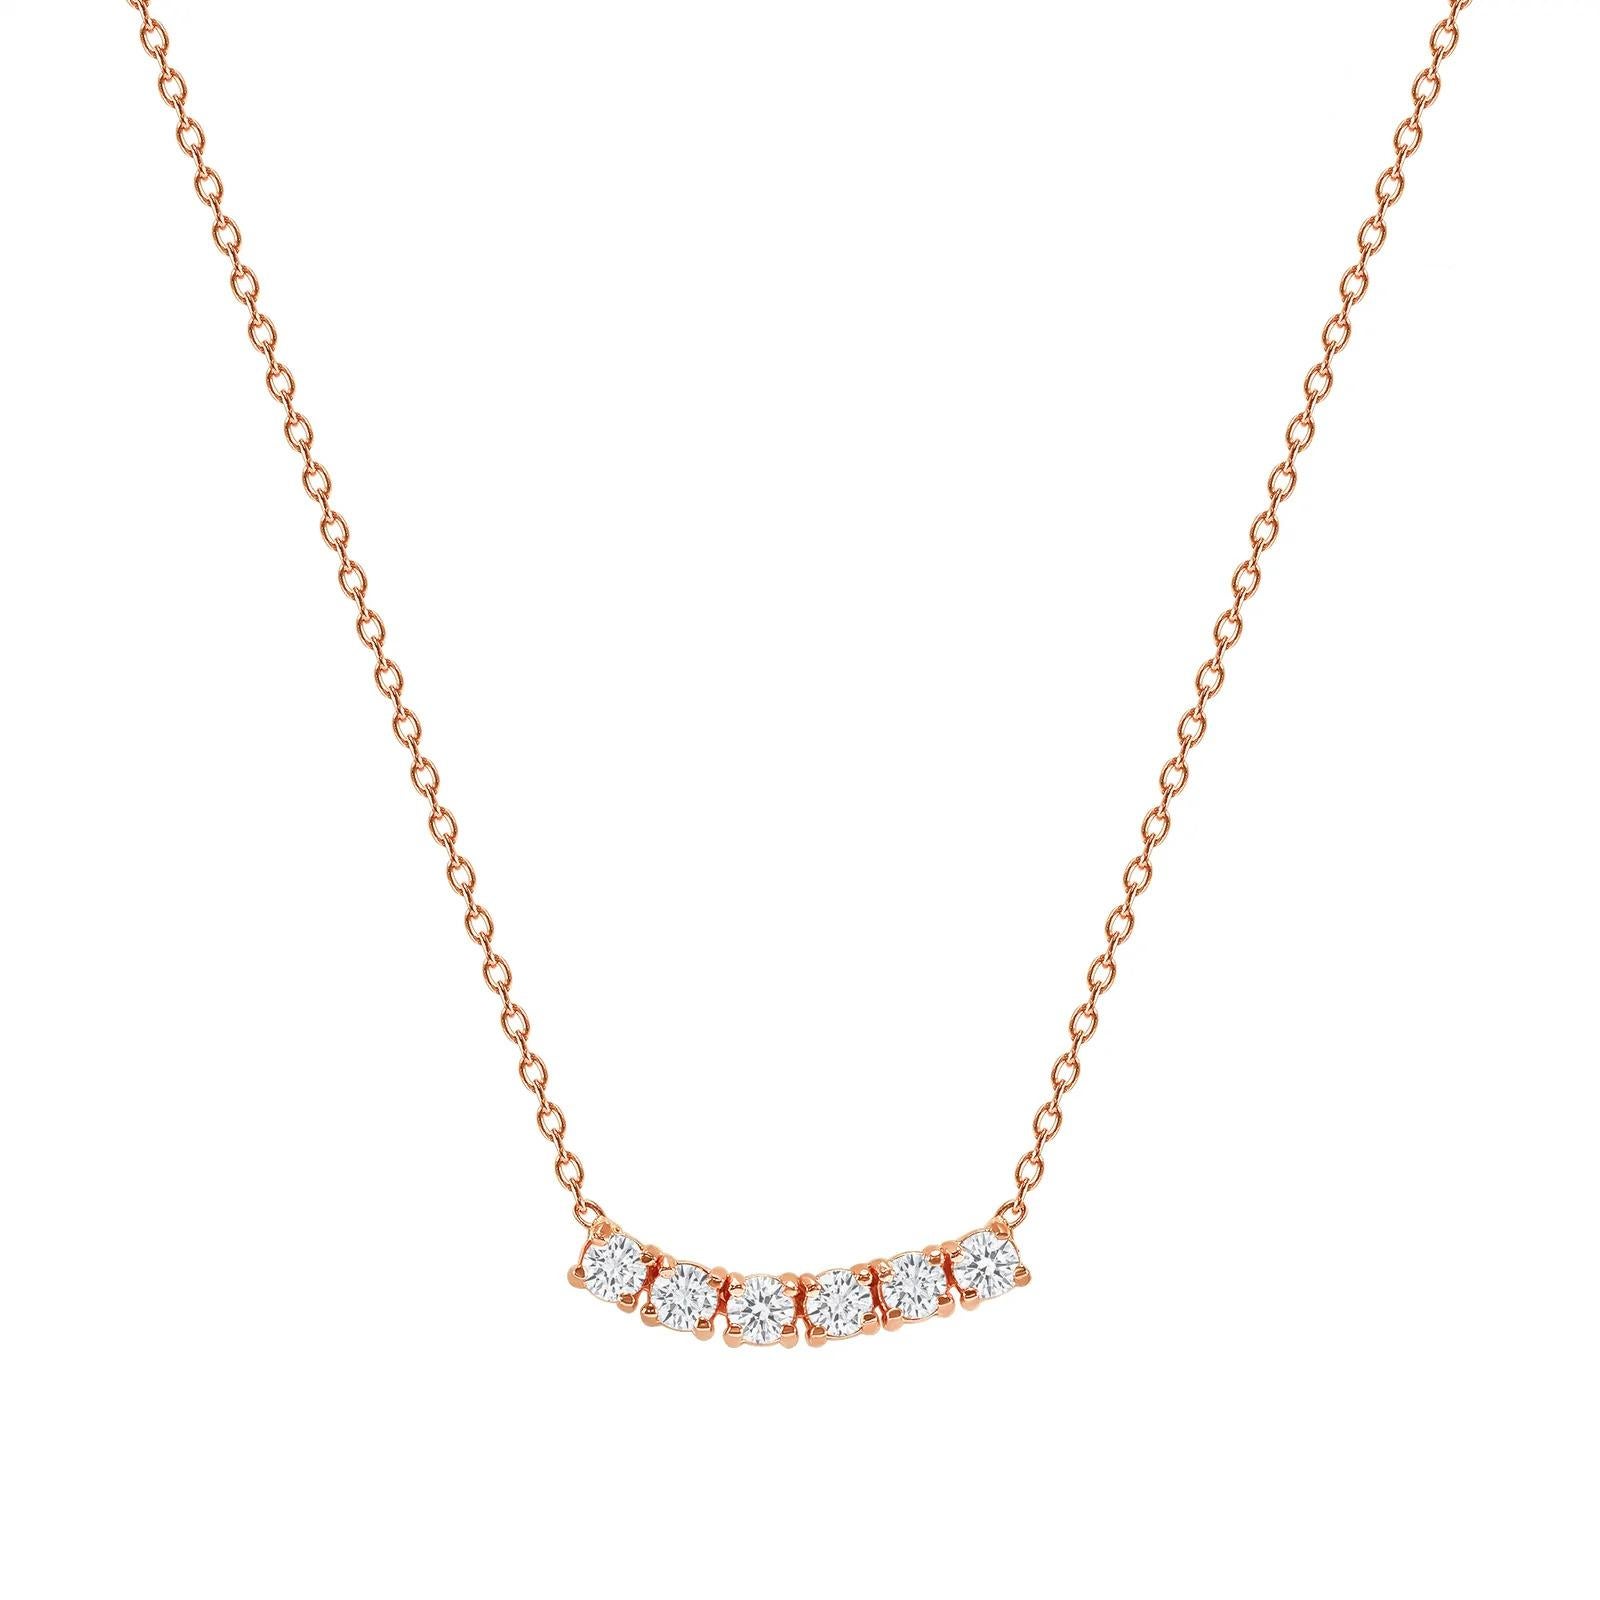 This petite, curved diamond necklace is crafted with gorgeous 14k gold set with six round diamonds.  

Gold: 14k 
Diamond Total Carats: 0.25 ct
Diamond Cut: Round (6 diamonds)
Diamond Clarity: VS
Diamond Color: F
Color: Rose Gold
Necklace Length: 16